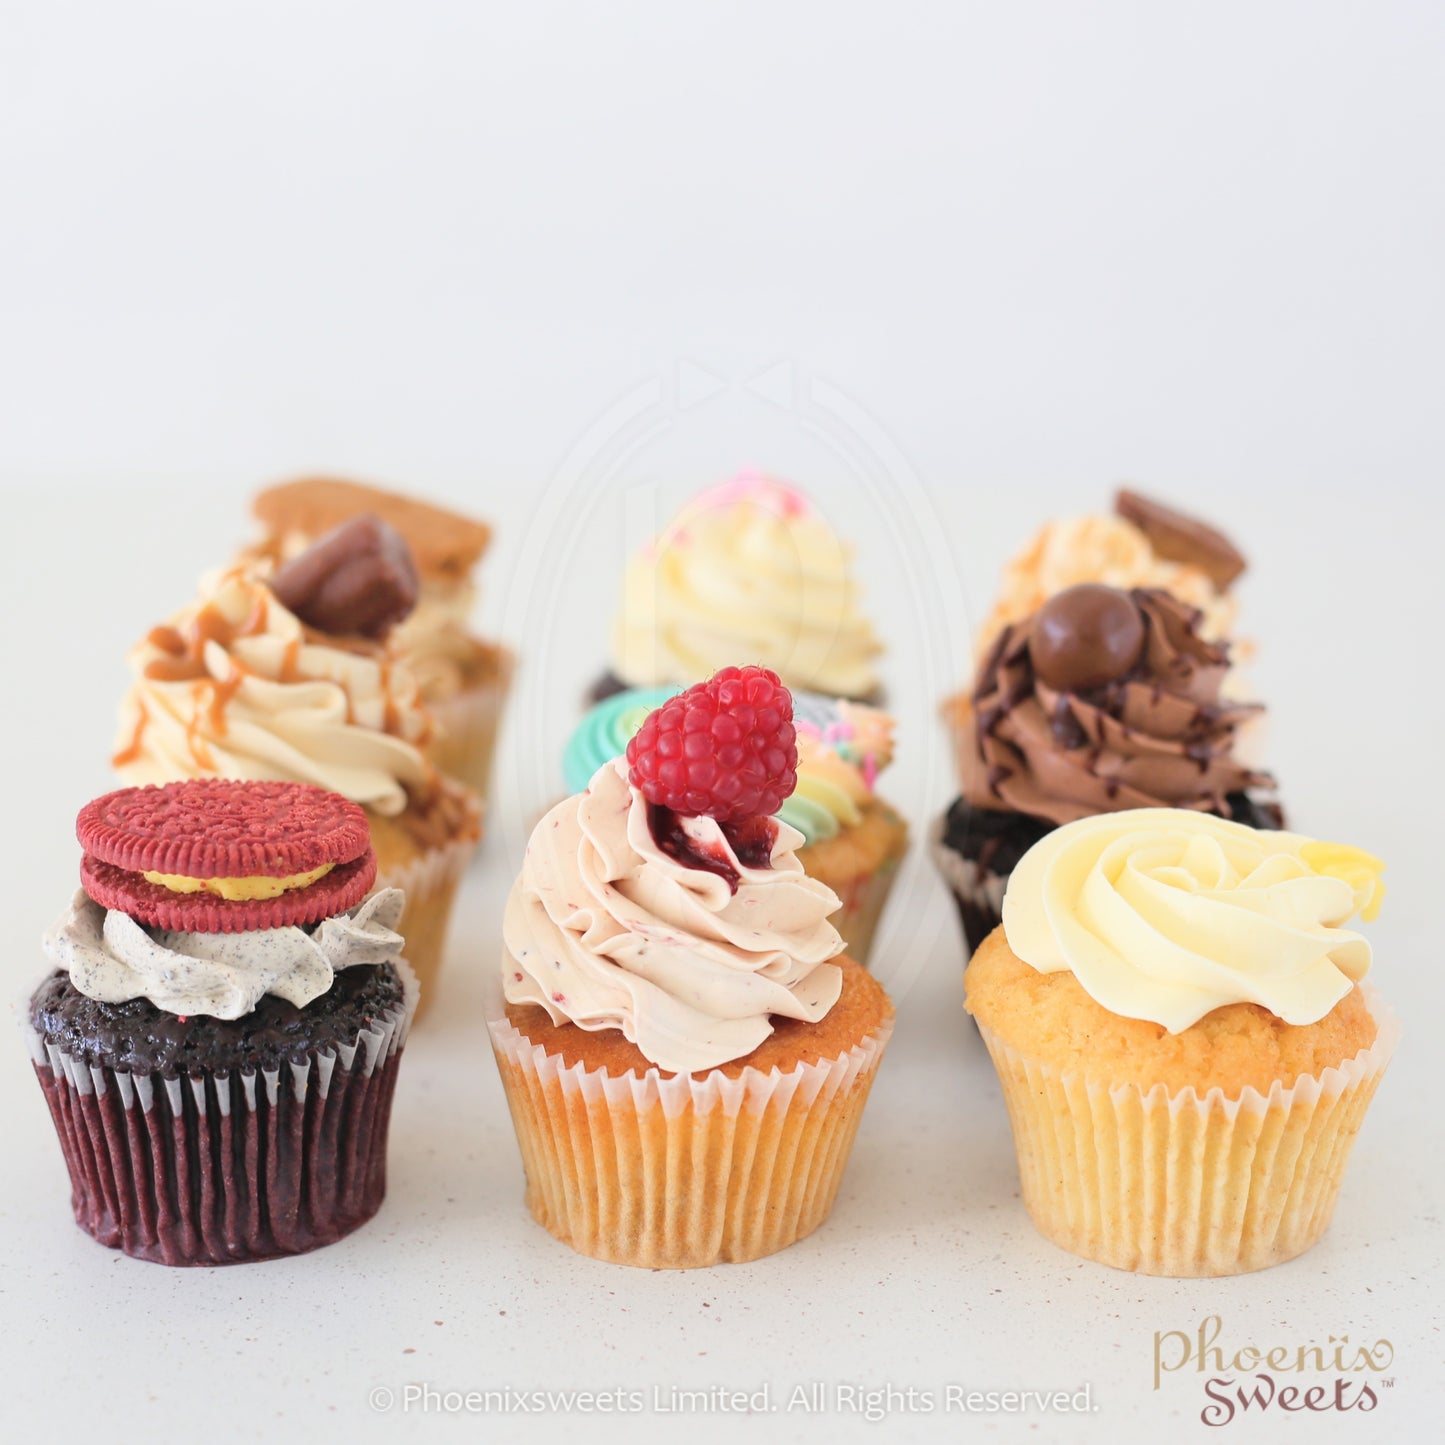 Gourmet Cupcake - Random Flavours (24pc Set) with Free Paper Cupcake Tower